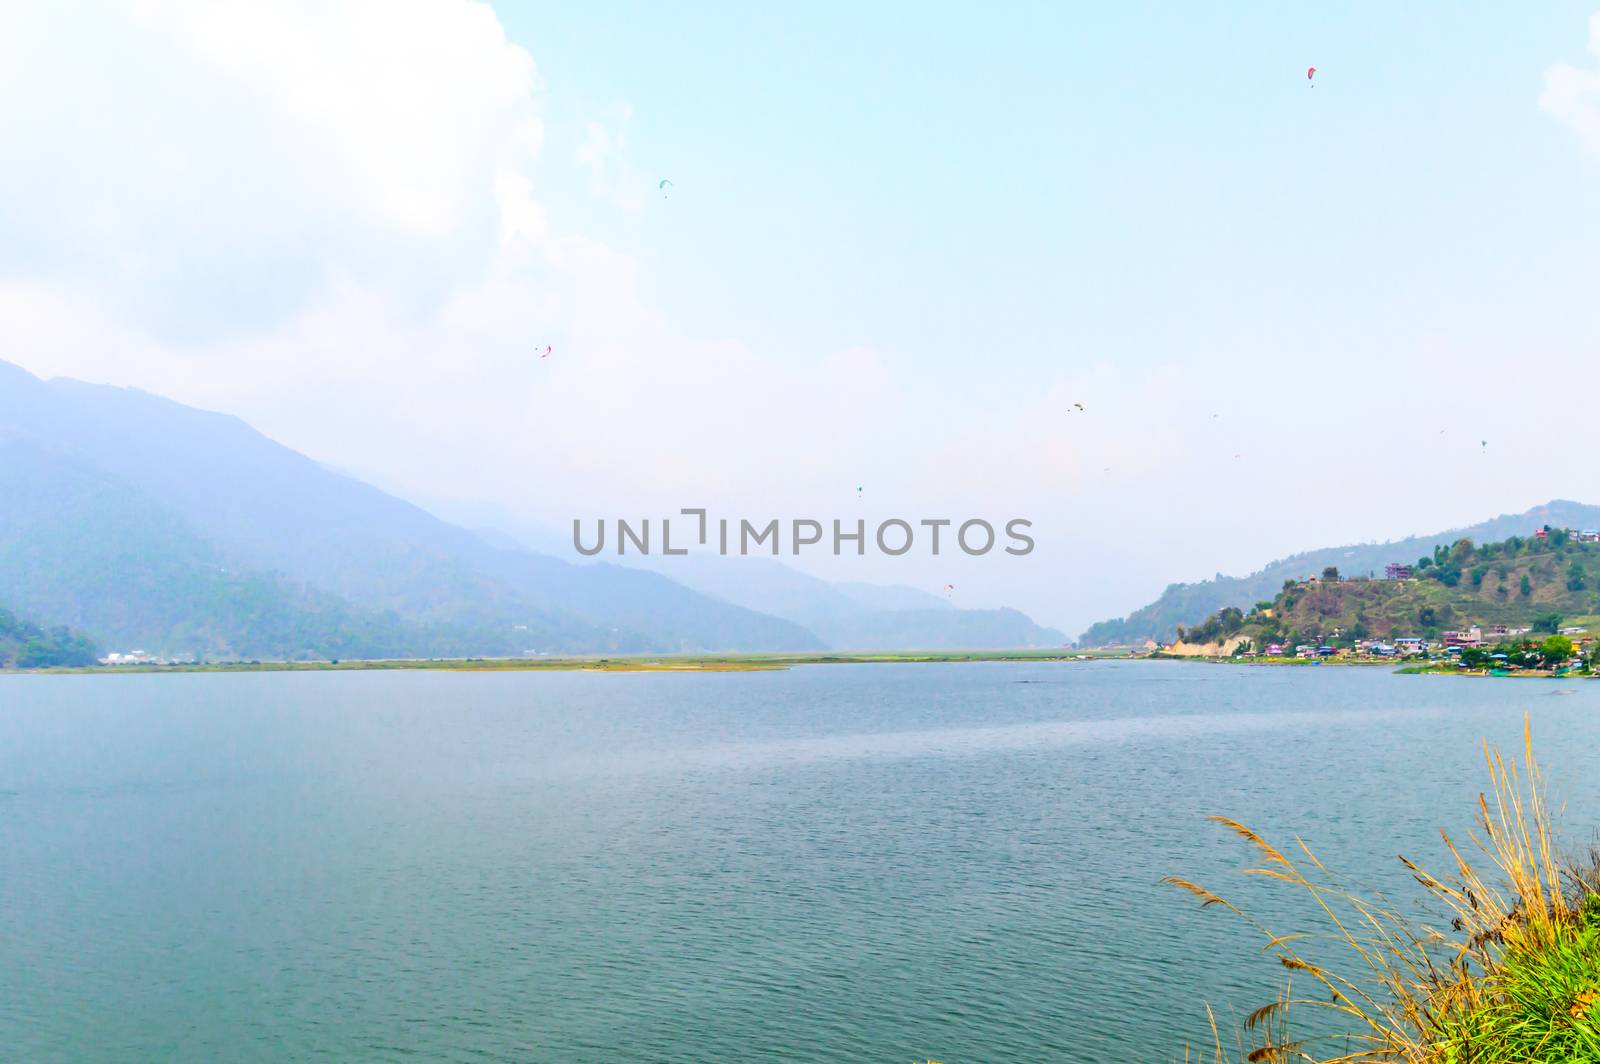 Photograph of sky, lake, mountain and reflexion Near Pokhara Lake at Kathmandu Nepal. Snap in portrait, landscape, wide screen. Vintage film look. Nature Freedom, Travel, Energy, Environment Concept.